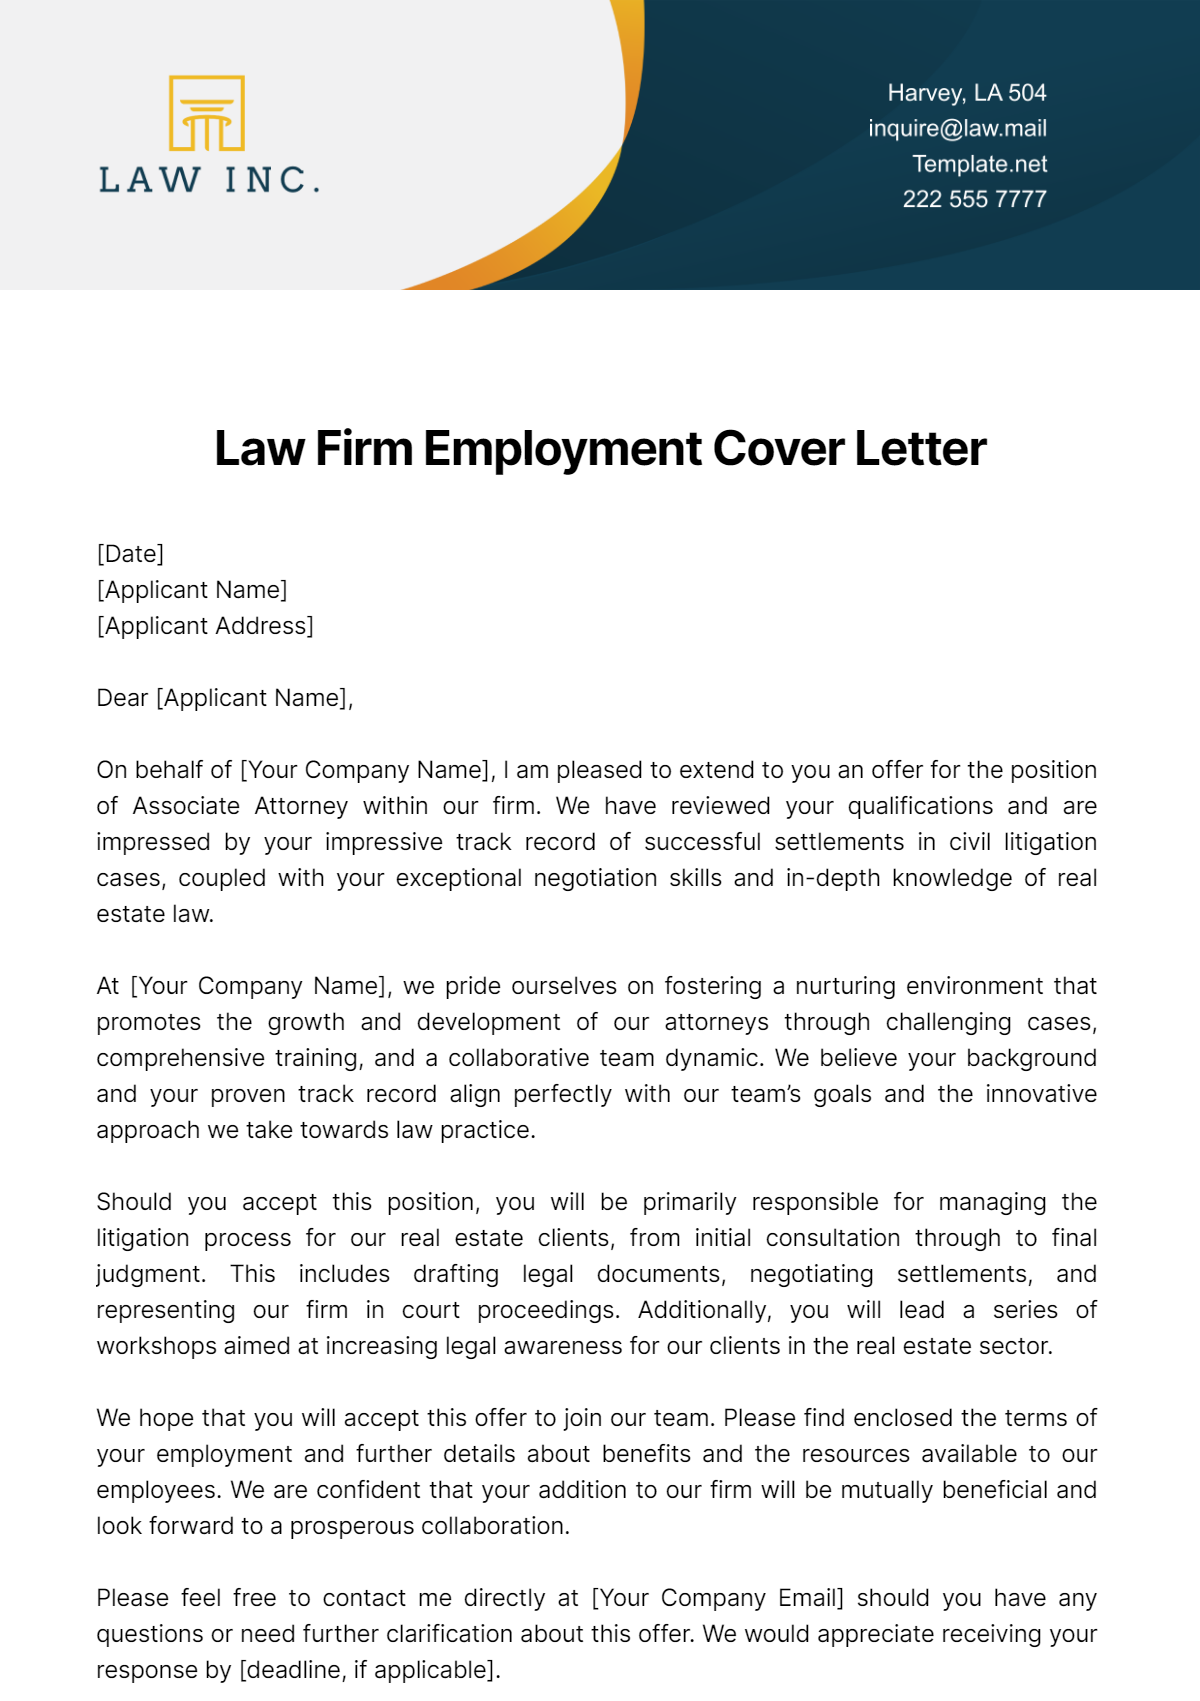 Free Law Firm Employment Cover Letter Template